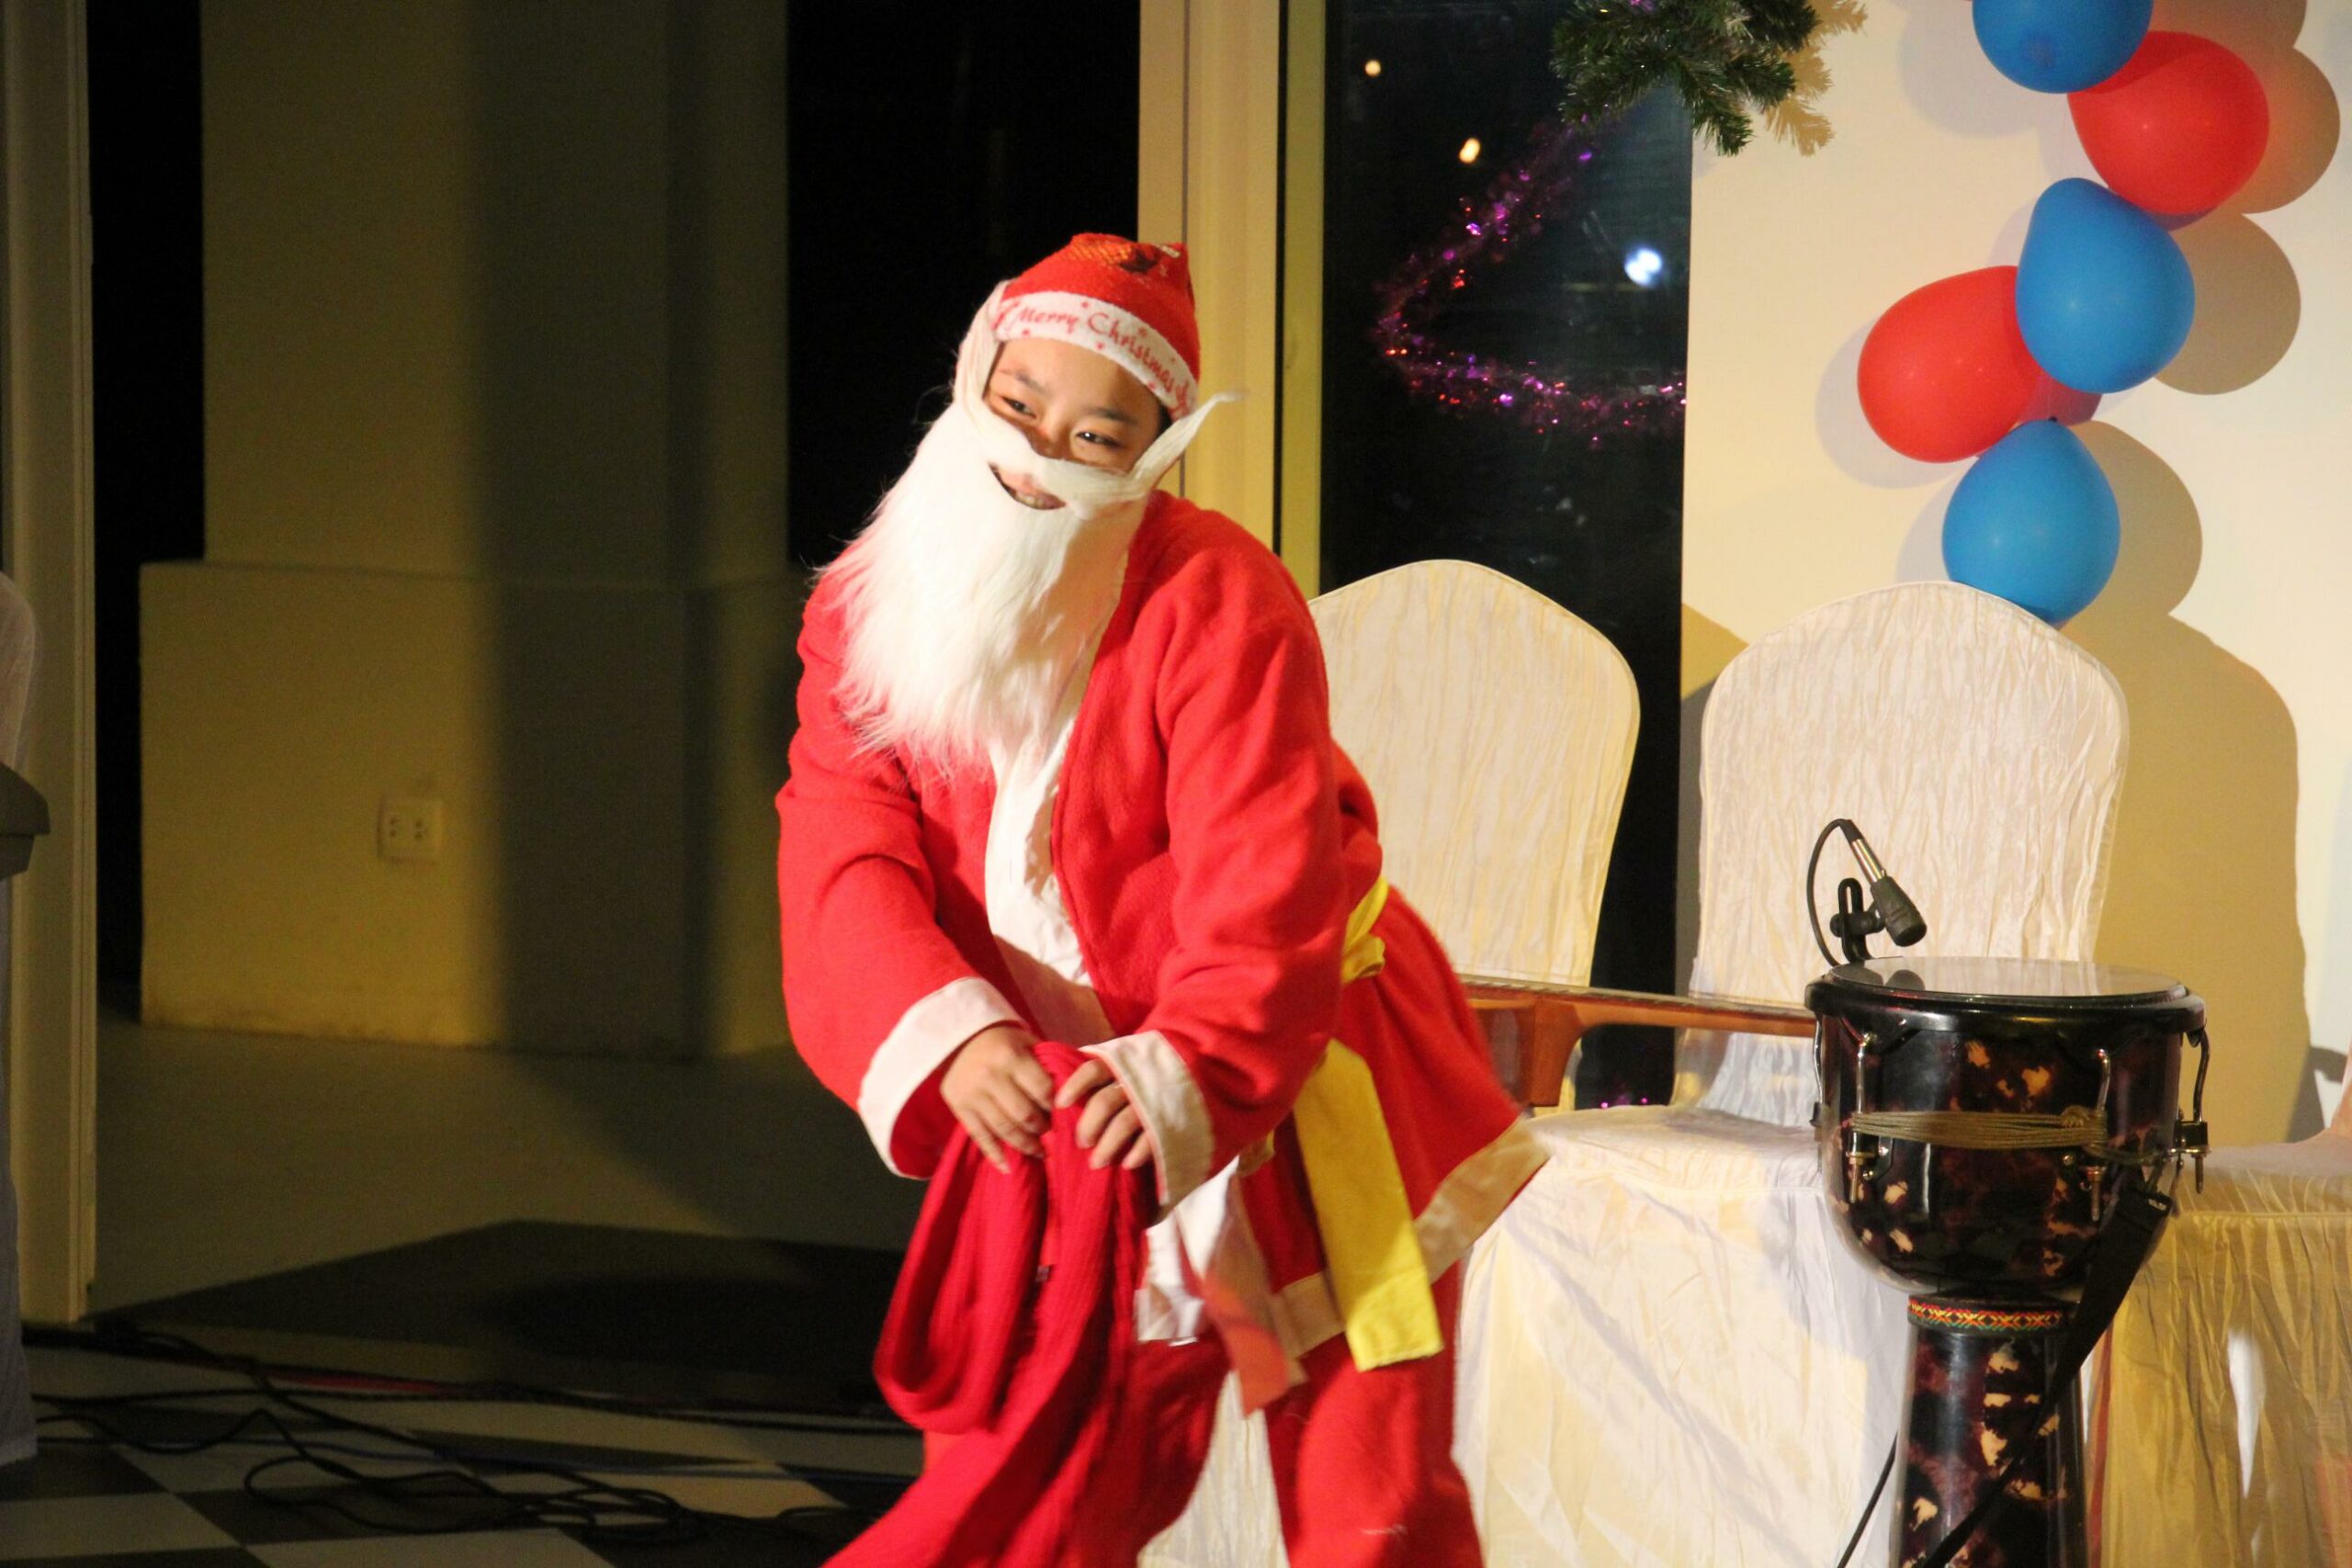 A Vietnamese boy dons a Santa Claus suit in a Christmas pageant in Hoi An, Vietnam.